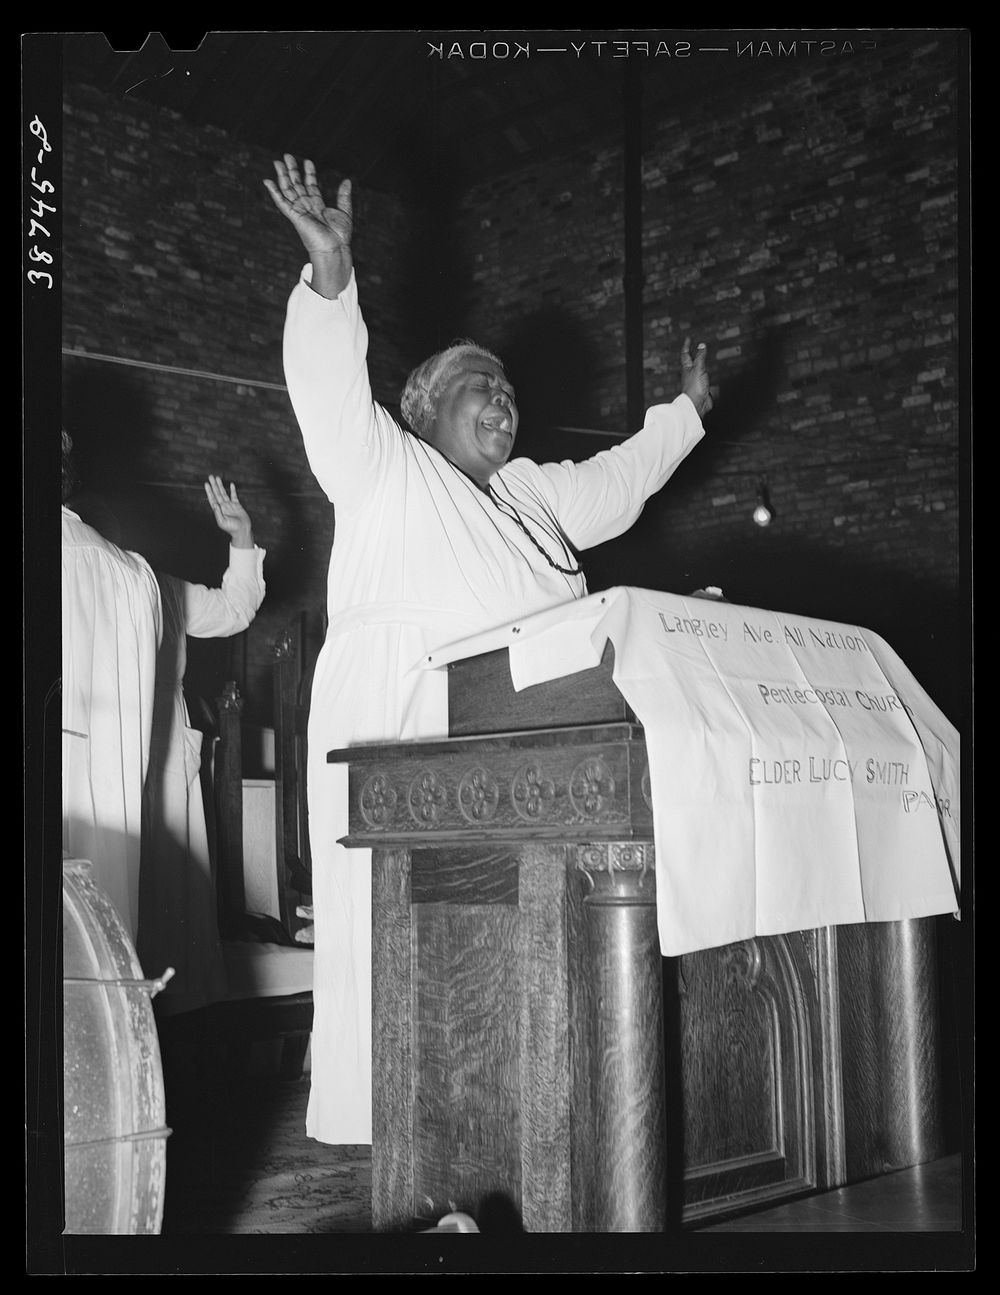 [Untitled photo, possibly related to: Pastor of the Pentecostal church. Chicago, Illinois] by Russell Lee